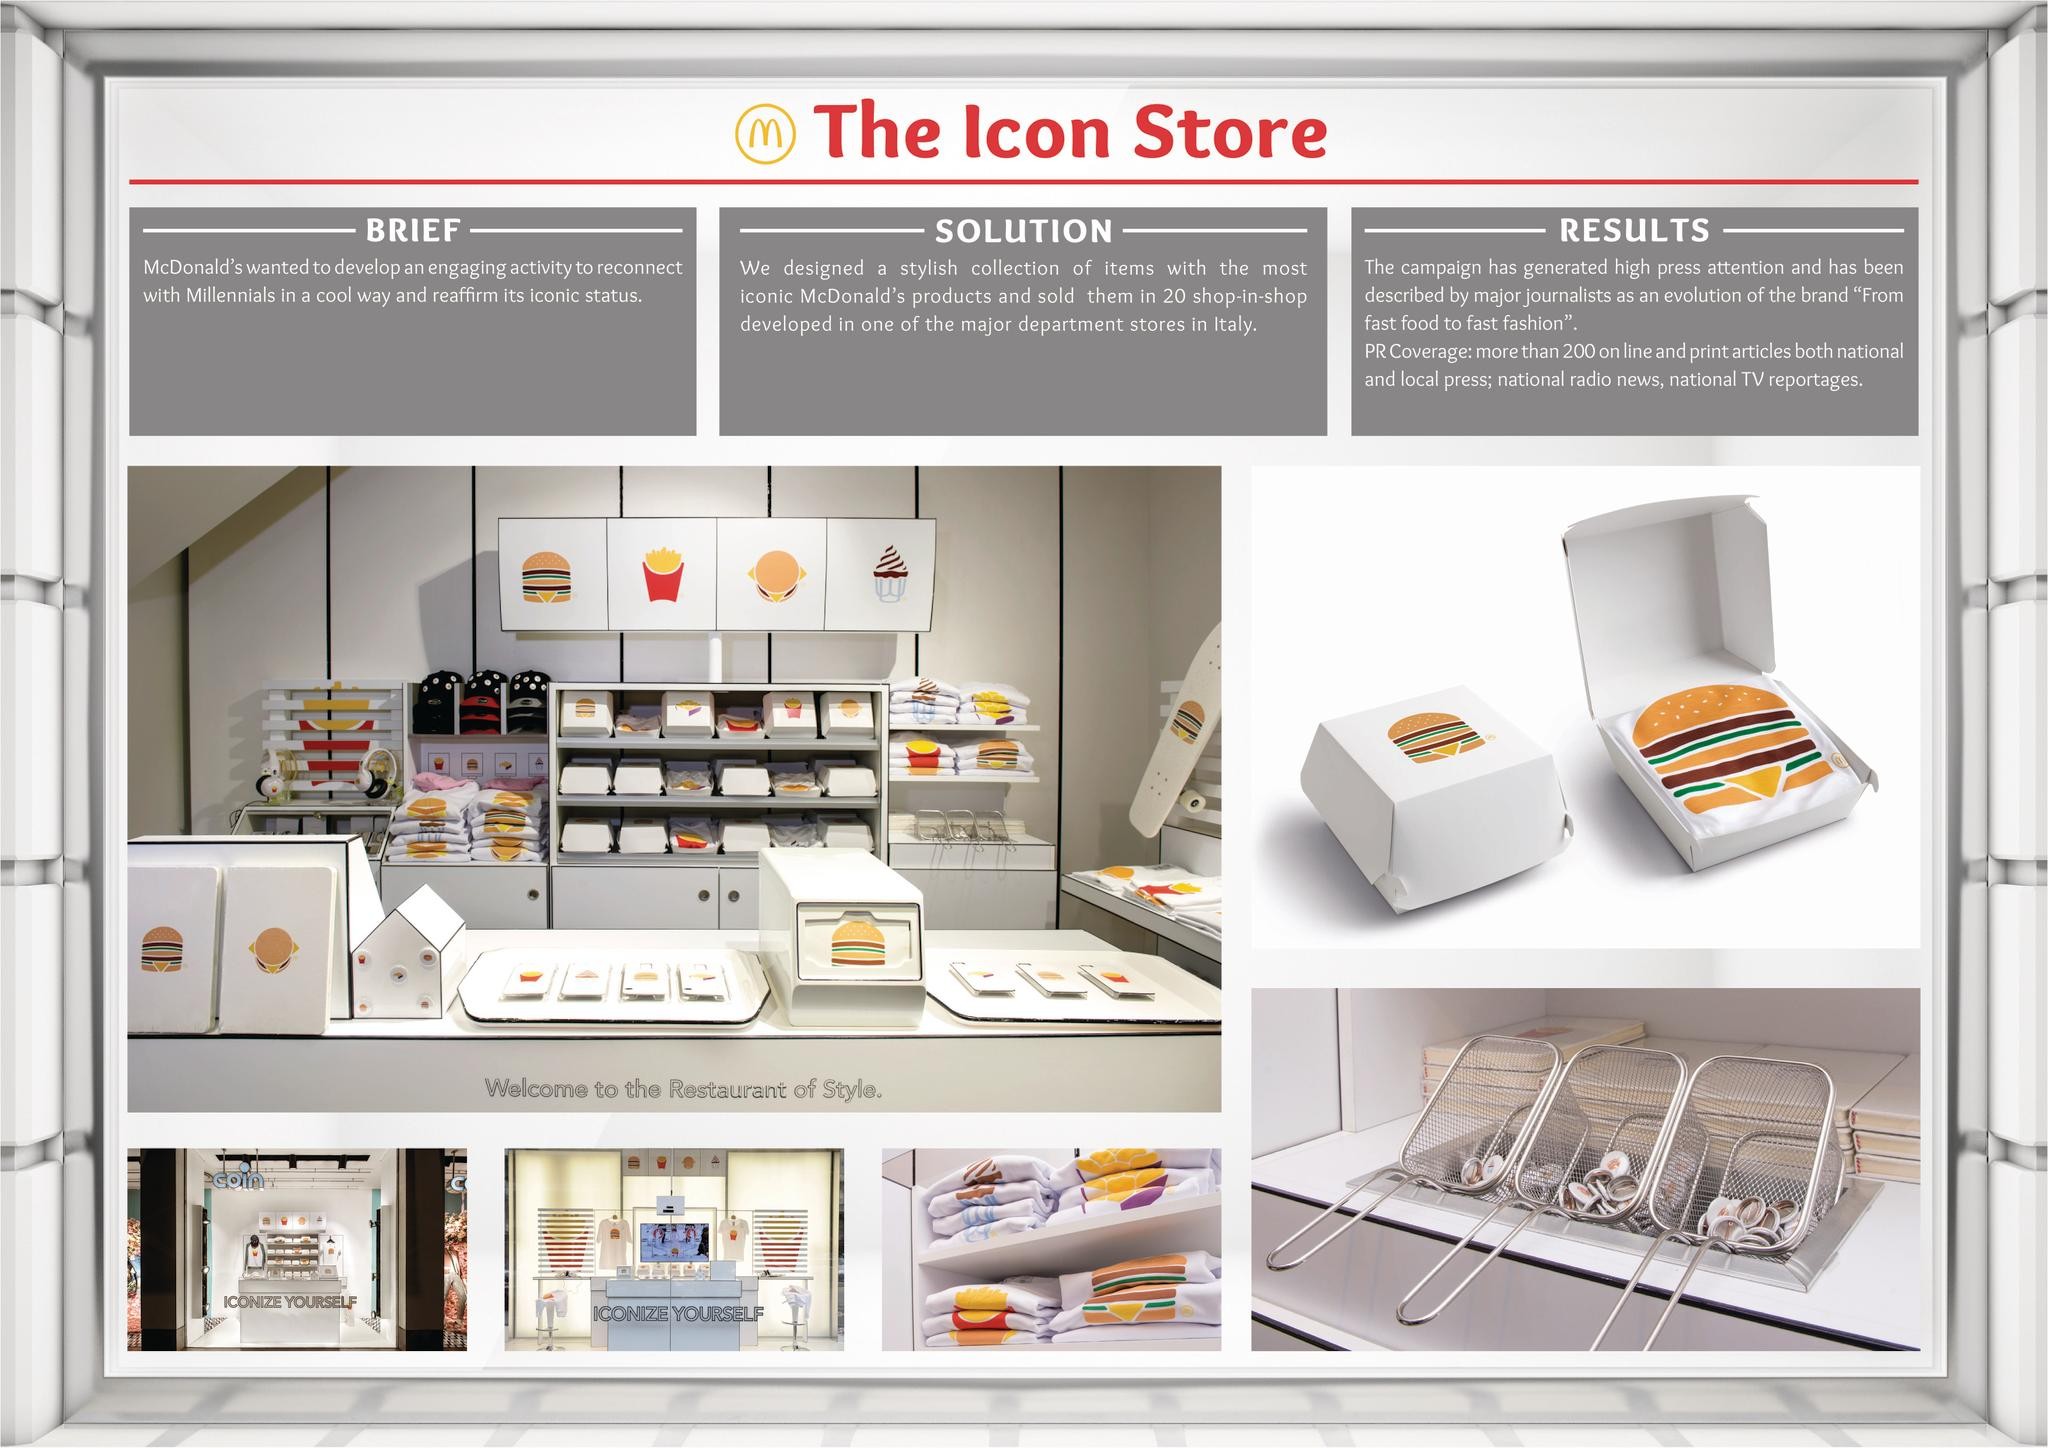 THE ICON STORE